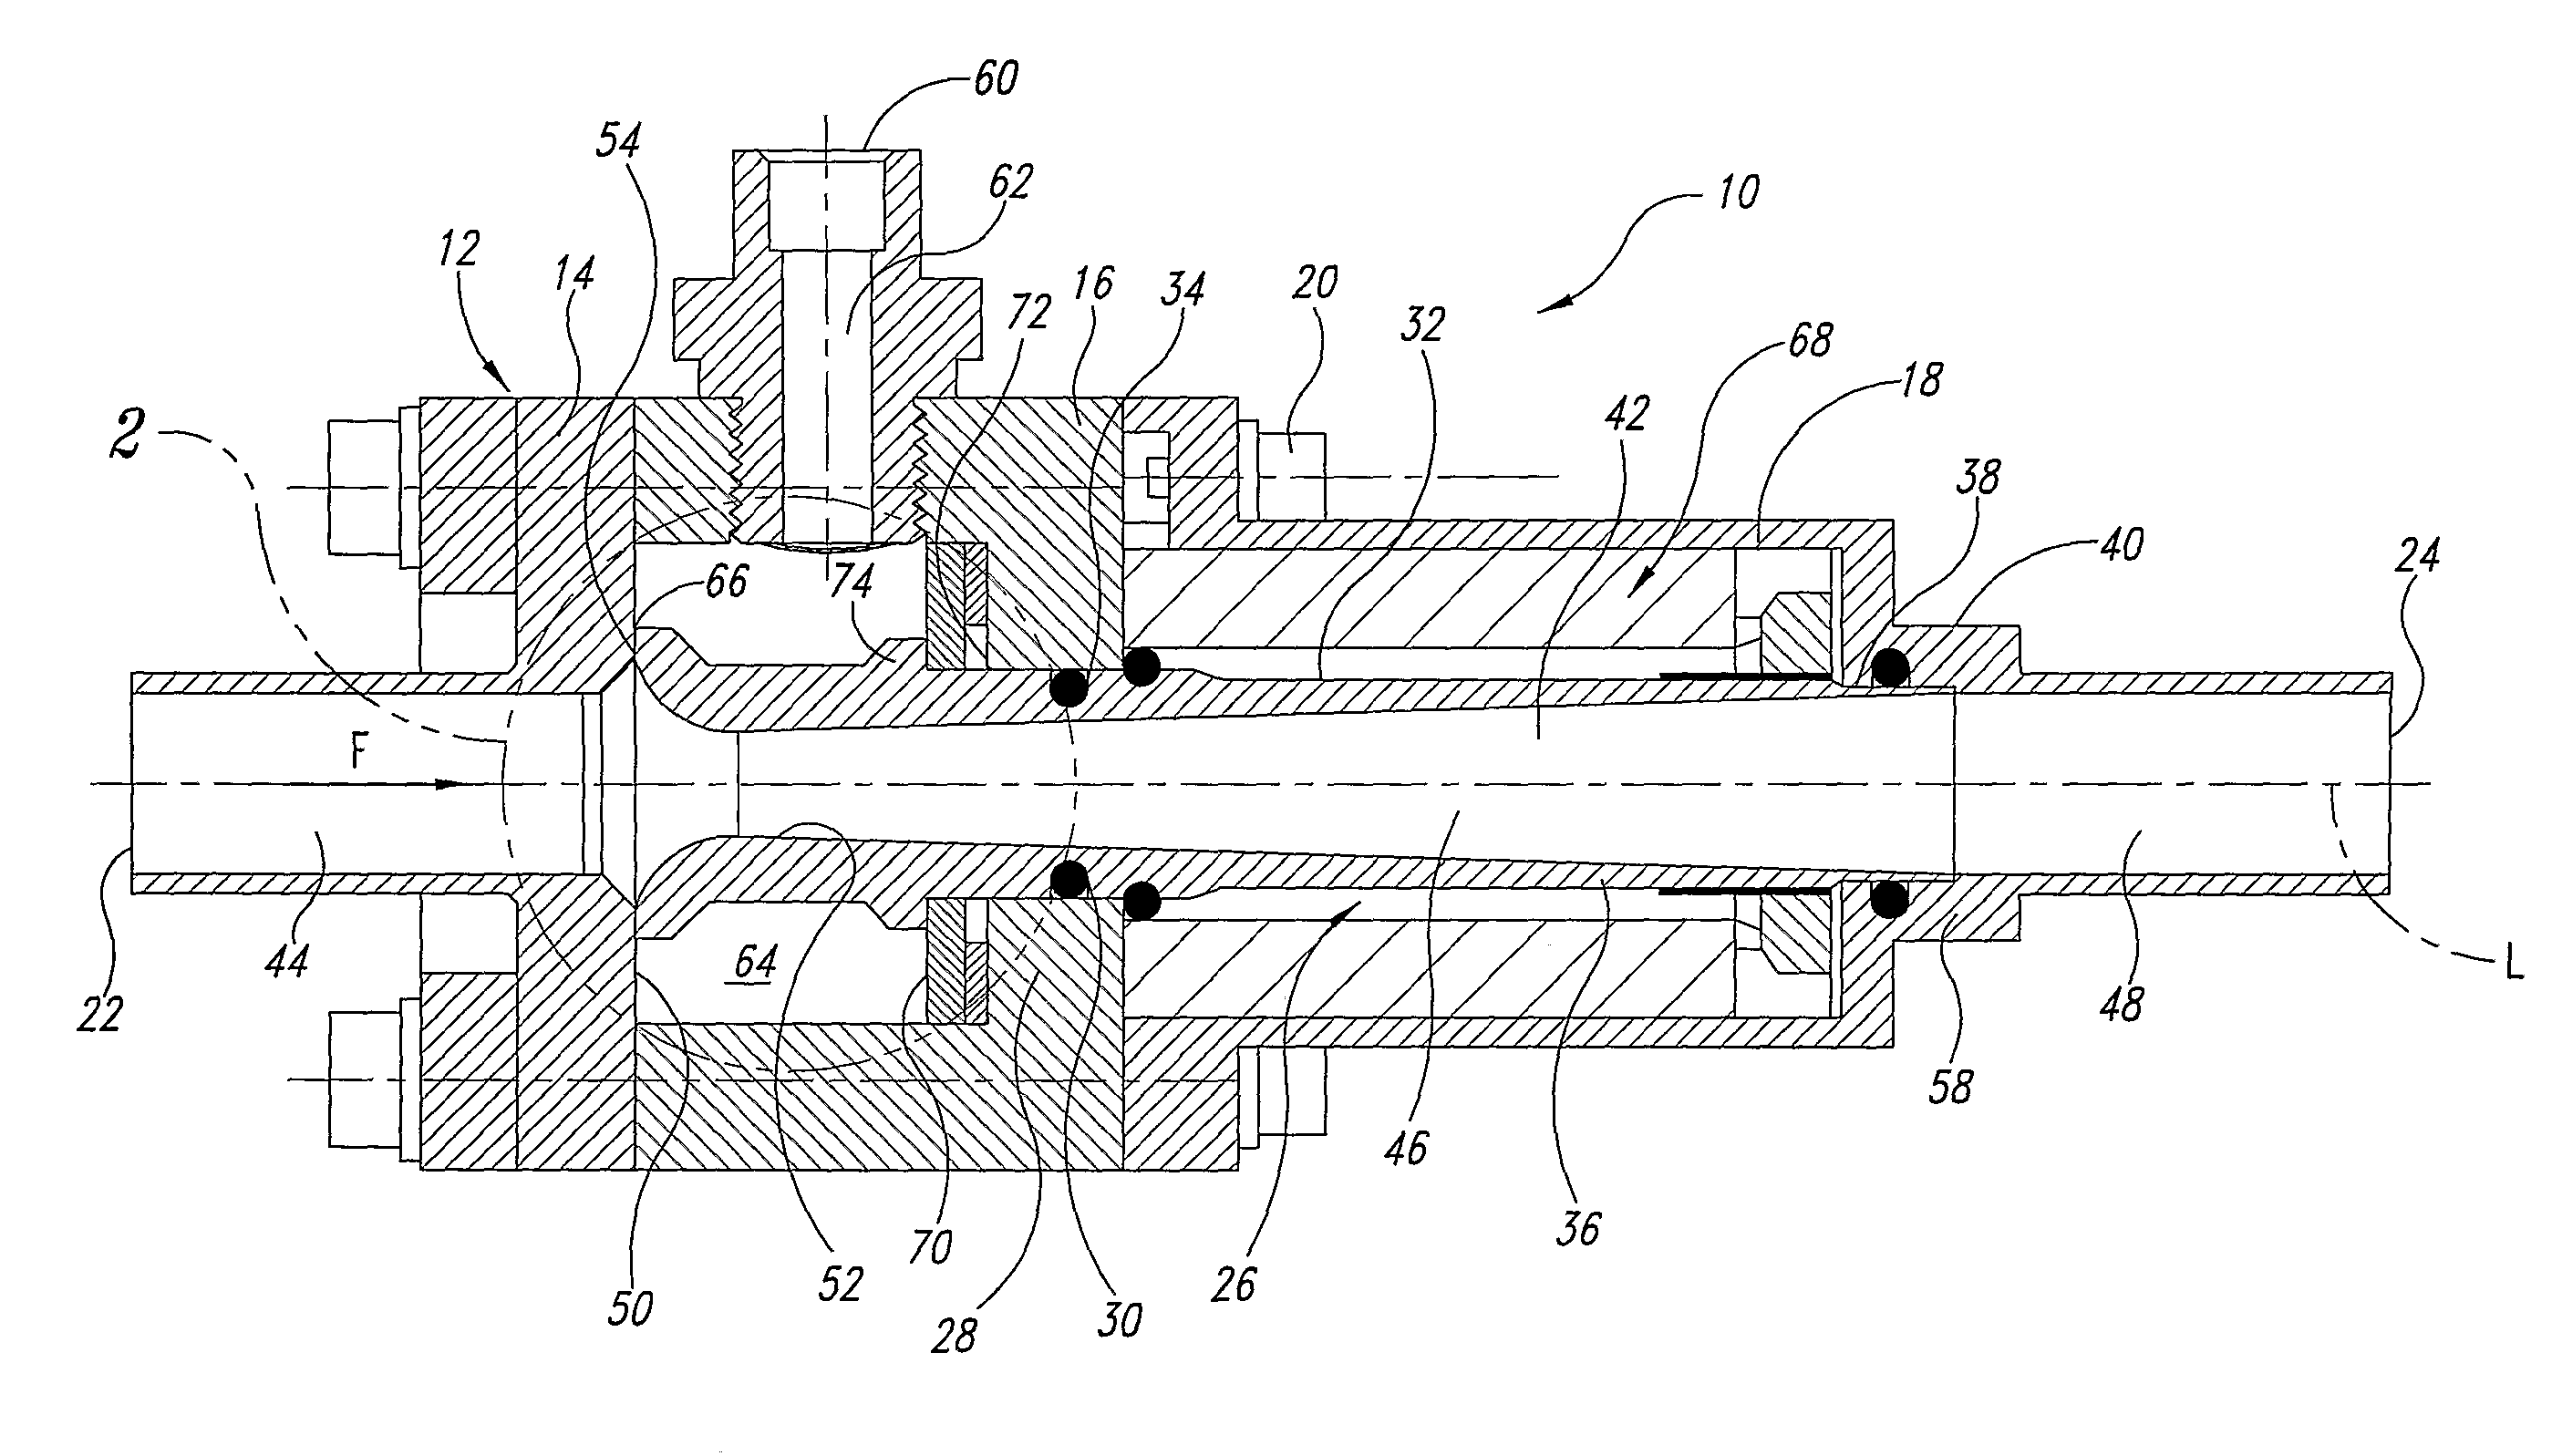 Fuel Cell System with Variable Coanda Amplifiers for Gas Recirculation and System Pressure Regulation